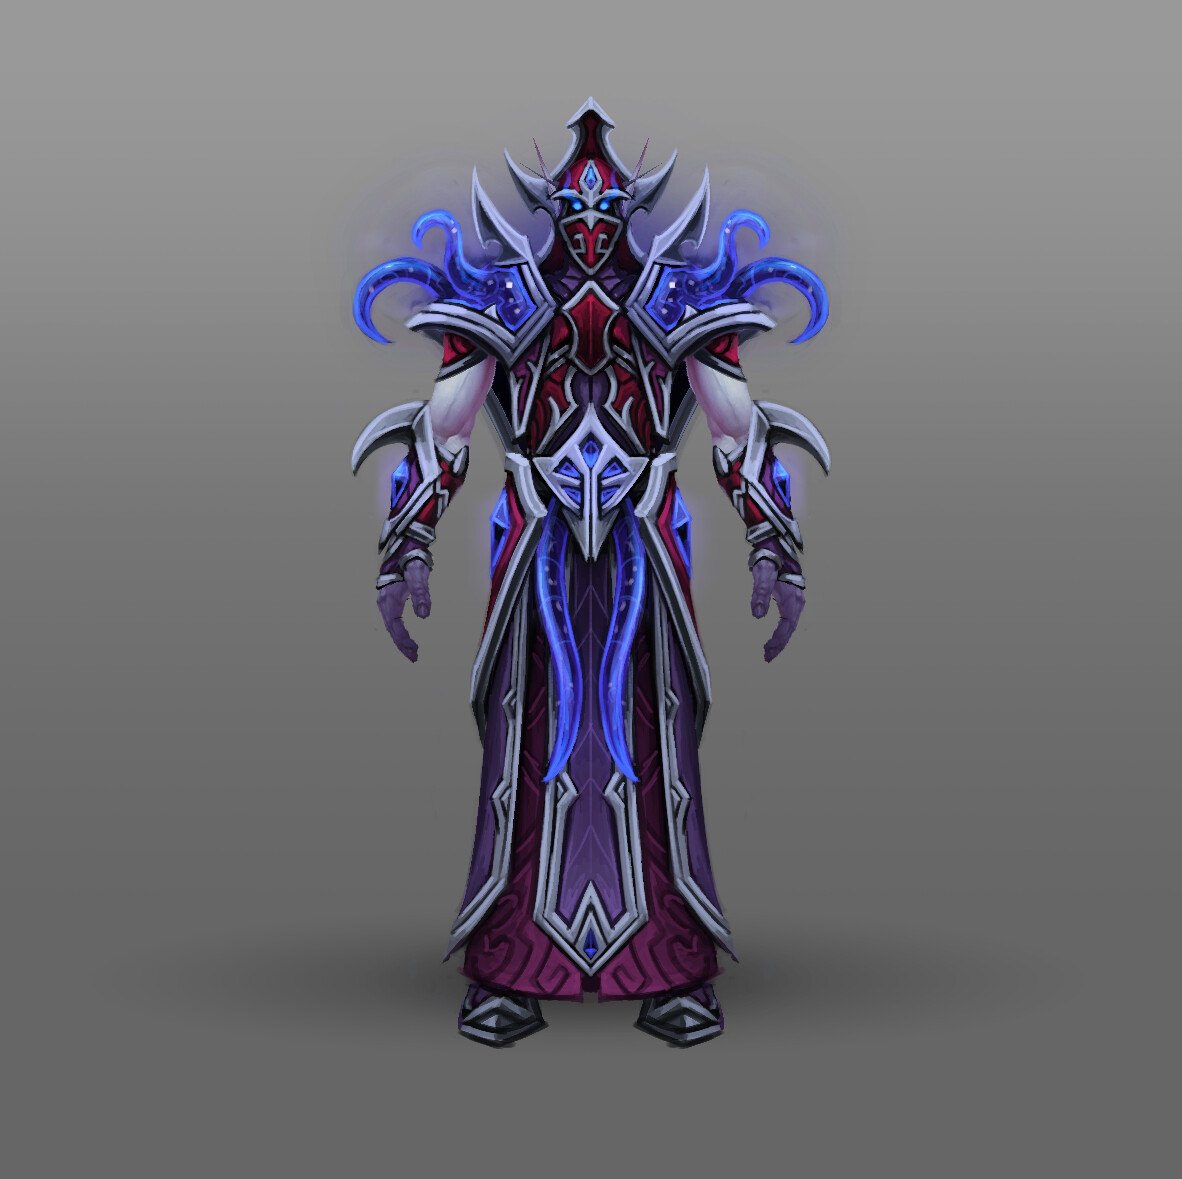 Warlock
The Warlock is meant to be the most liberal user of Void energy, displayed by void tentacles grasping from his shoulder pads into our reality.